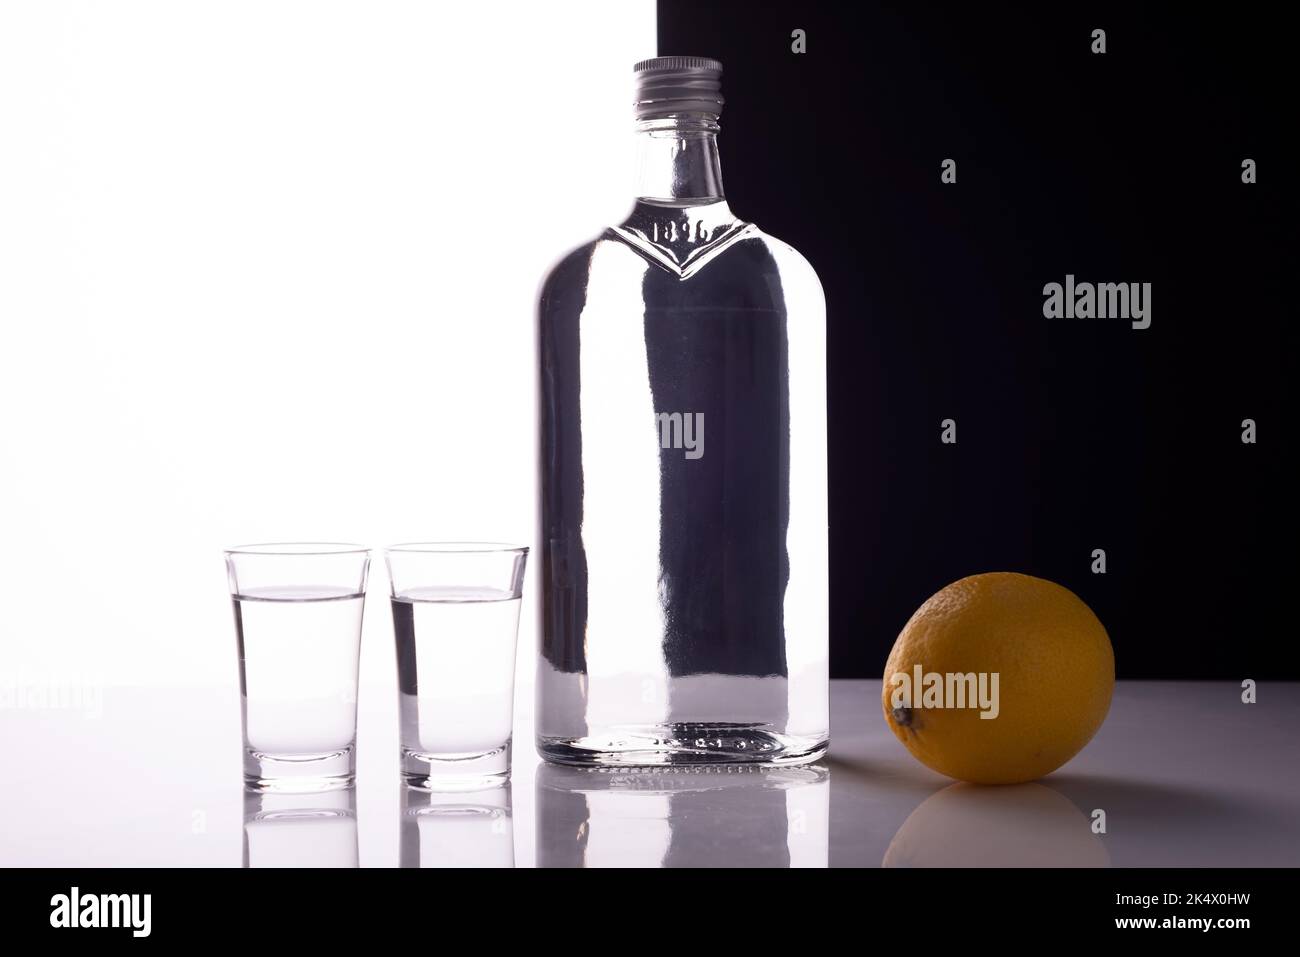 gin bottle with shot glasses on black and white background alcoholic drink with lemon. Stock Photo